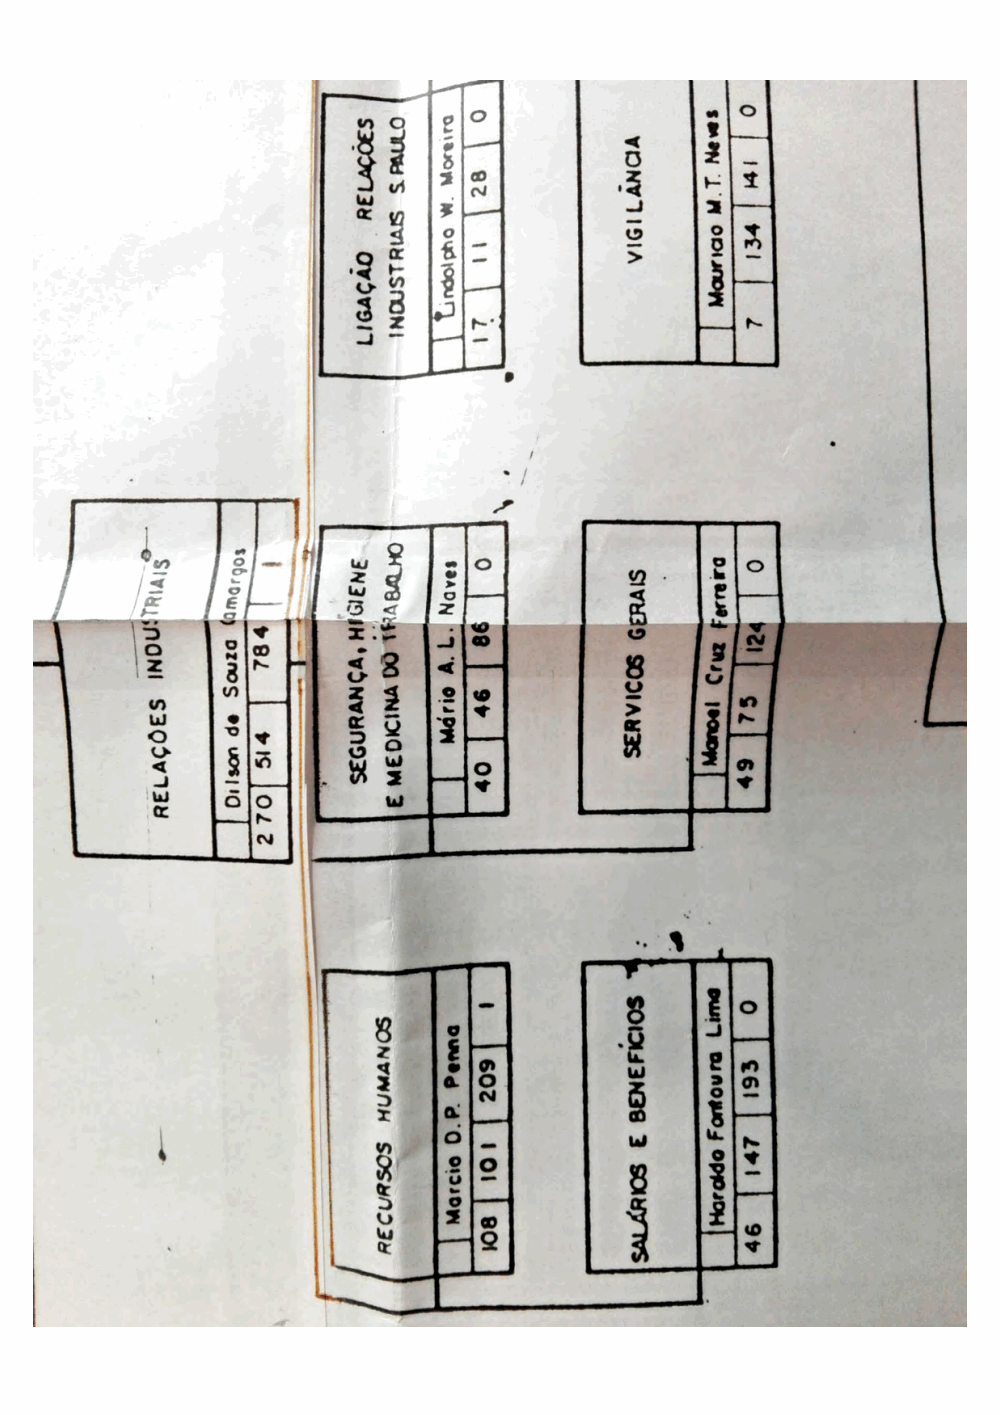 Page 4 from Archival organizational chart from Fiat’s Italian headquarters showing the Brazilian security apparatus